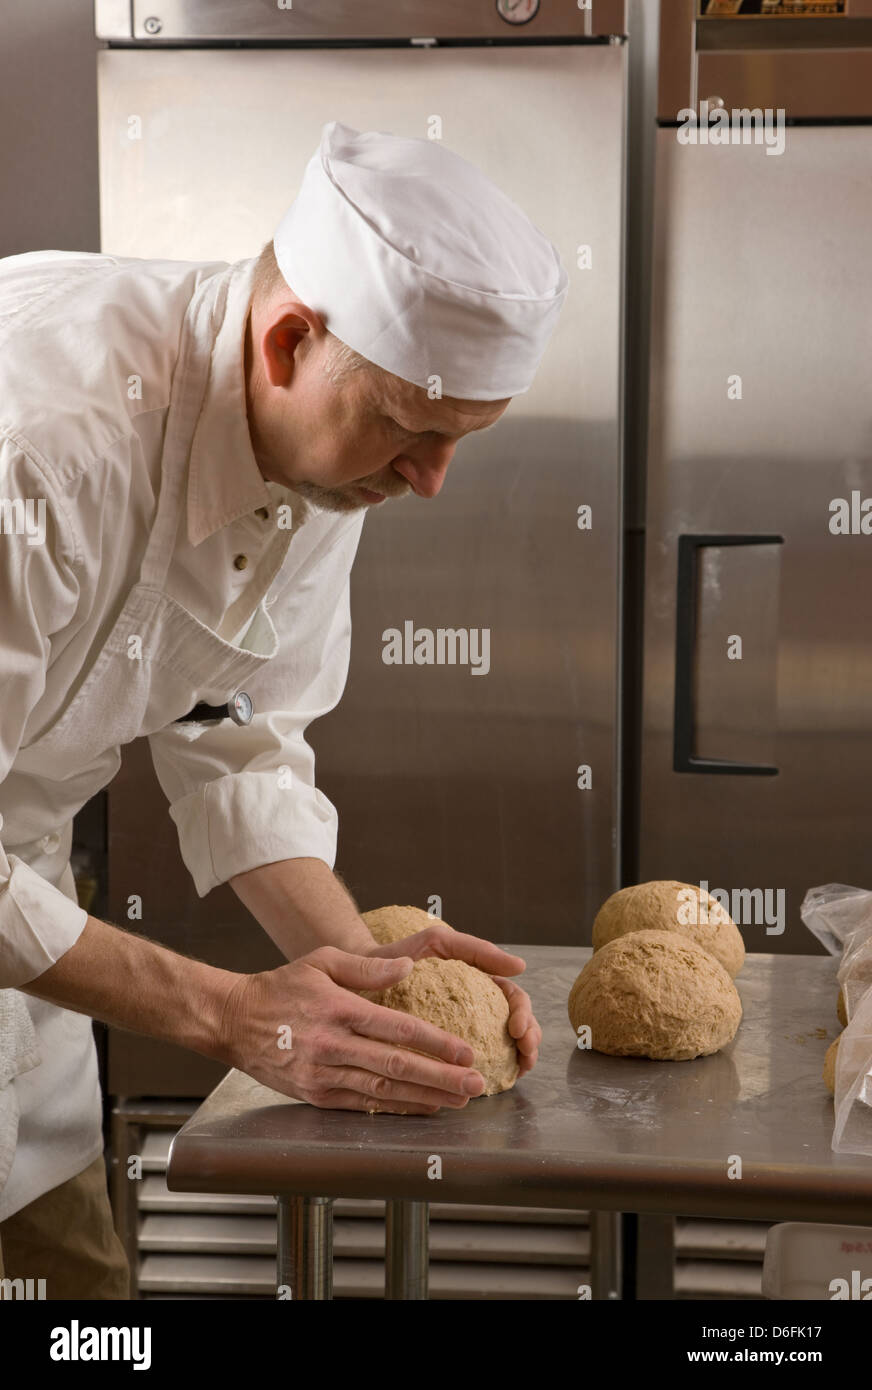 Professional cook preparing fresh bread in a commercial bakery Stock Photo